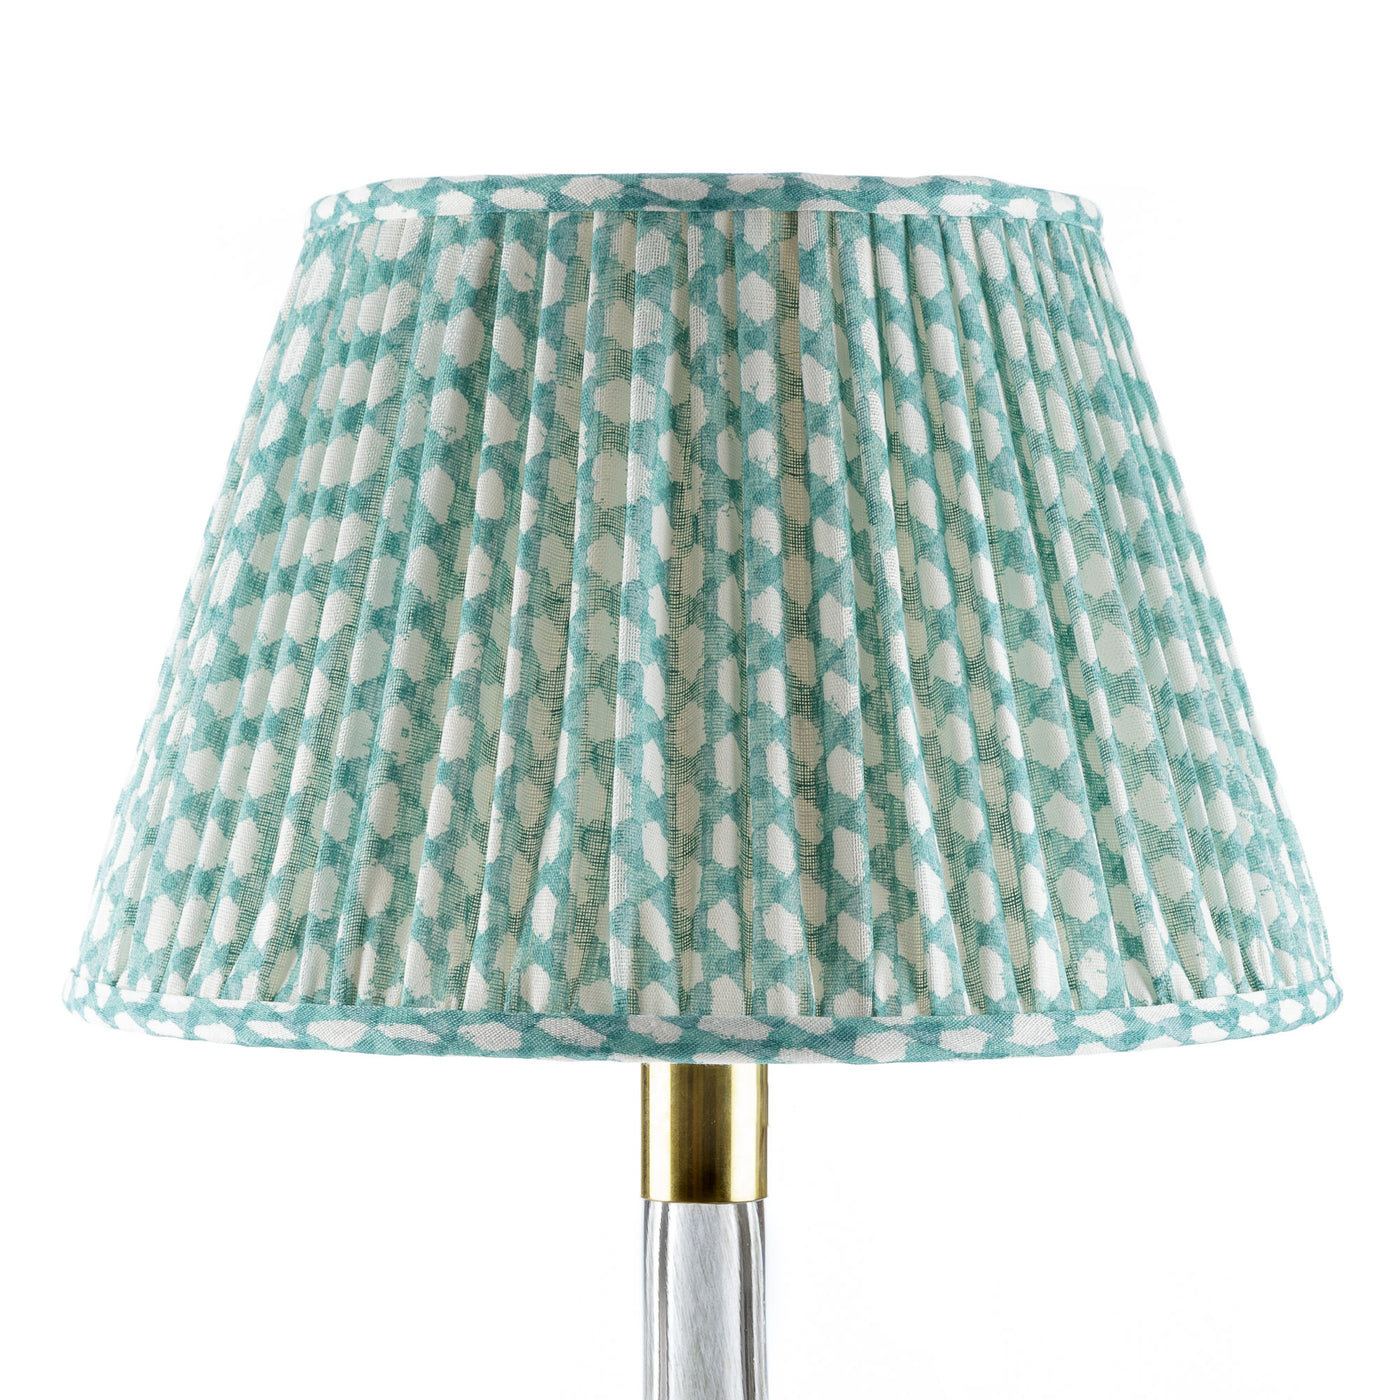 12" Fermoie Lampshade - Wicker in Turquoise  | Newport Lamp And Shade | Located in Newport, RI